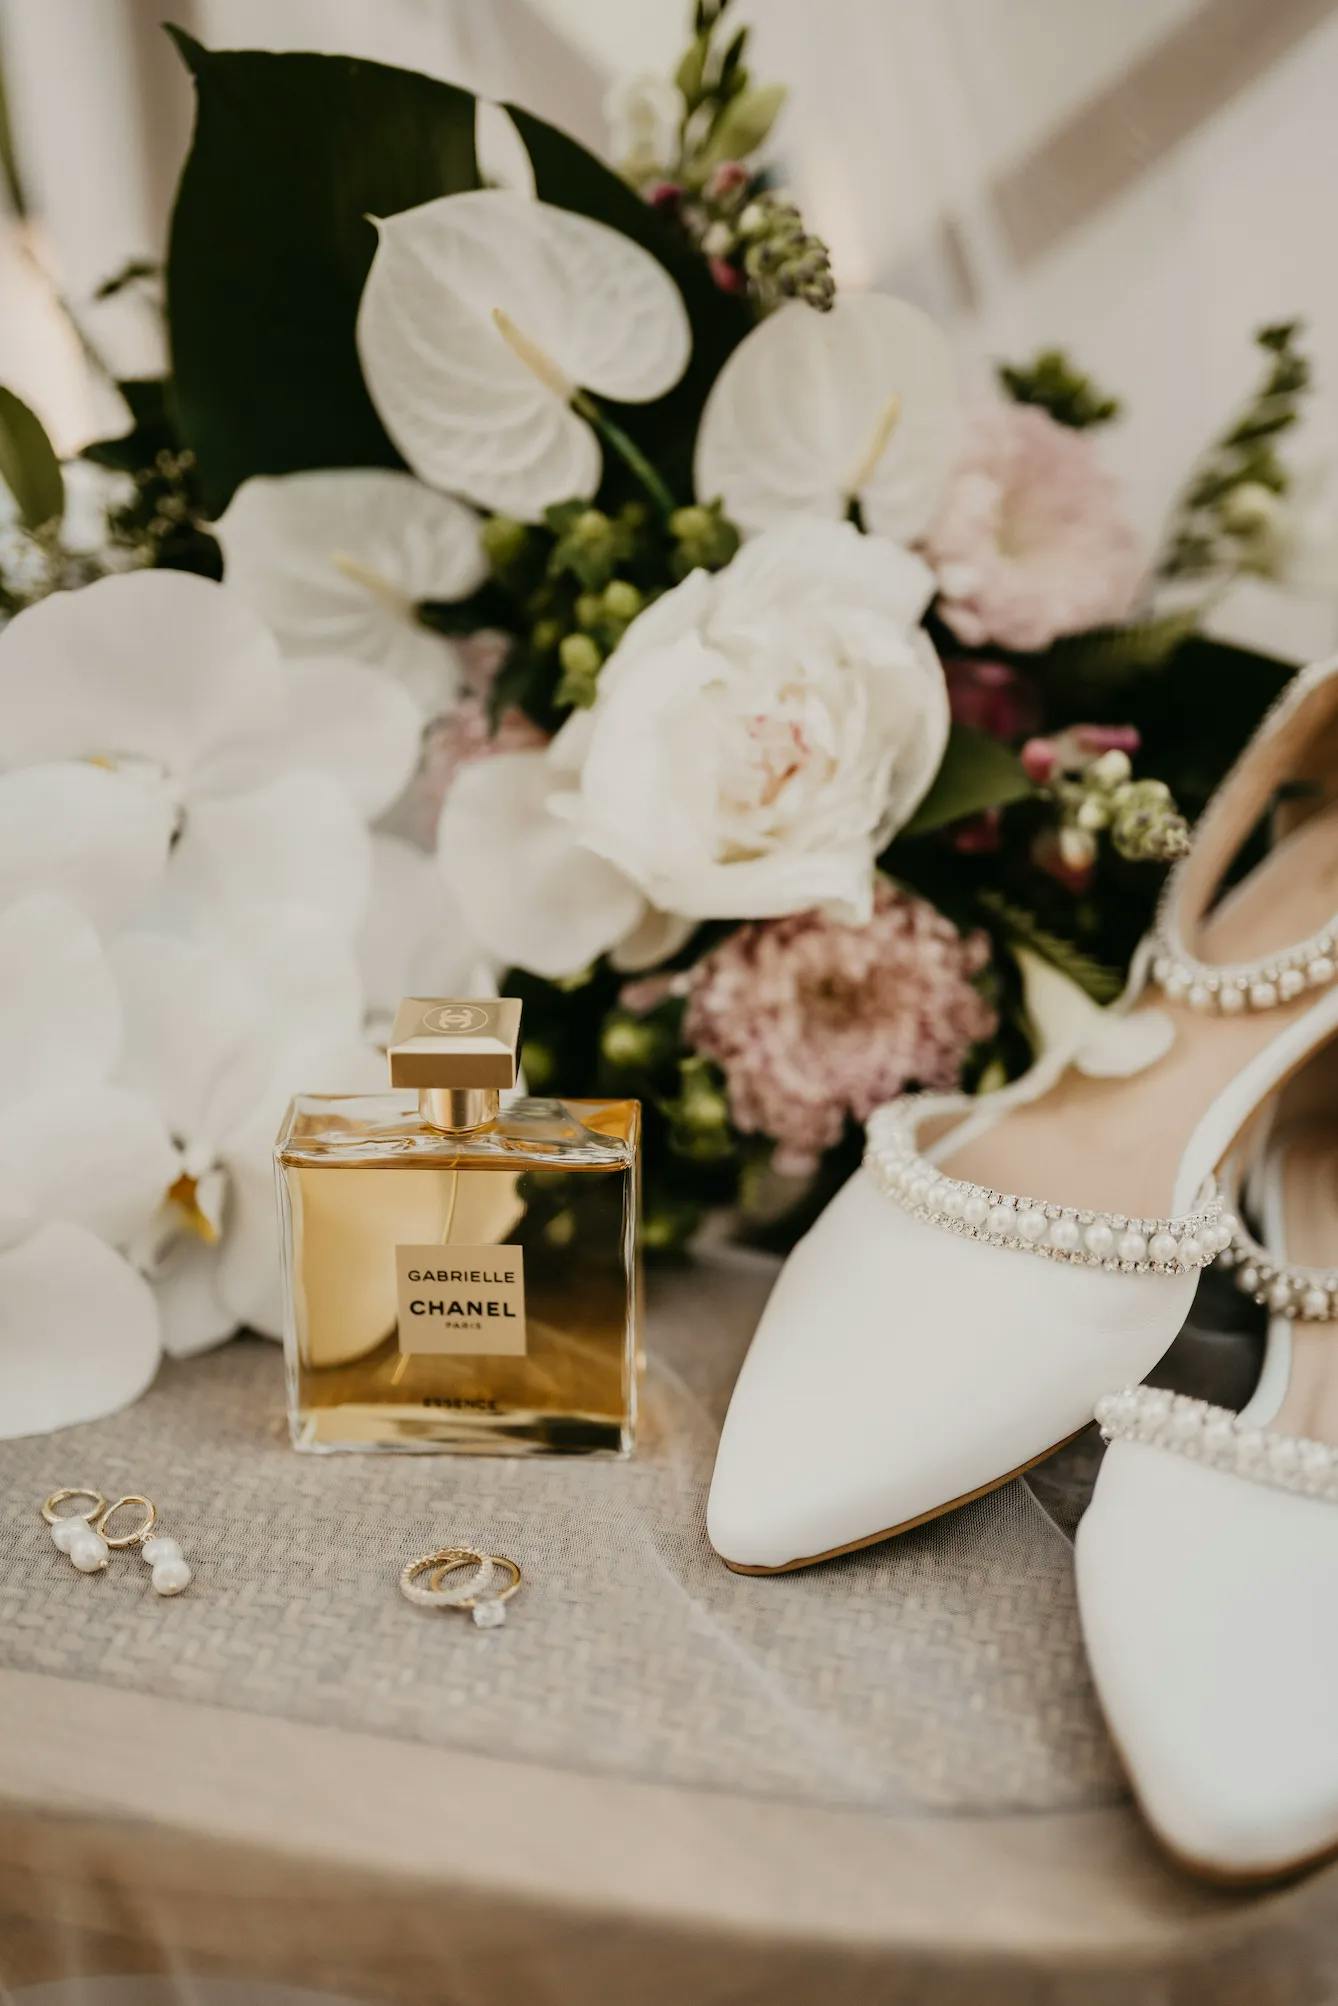 A photography setup features a Chanel perfume bottle, white bridal shoes adorned with pearls, a pair of pearl earrings, and a bouquet with a mix of white and pink flowers, all beautifully arranged on a textured surface.